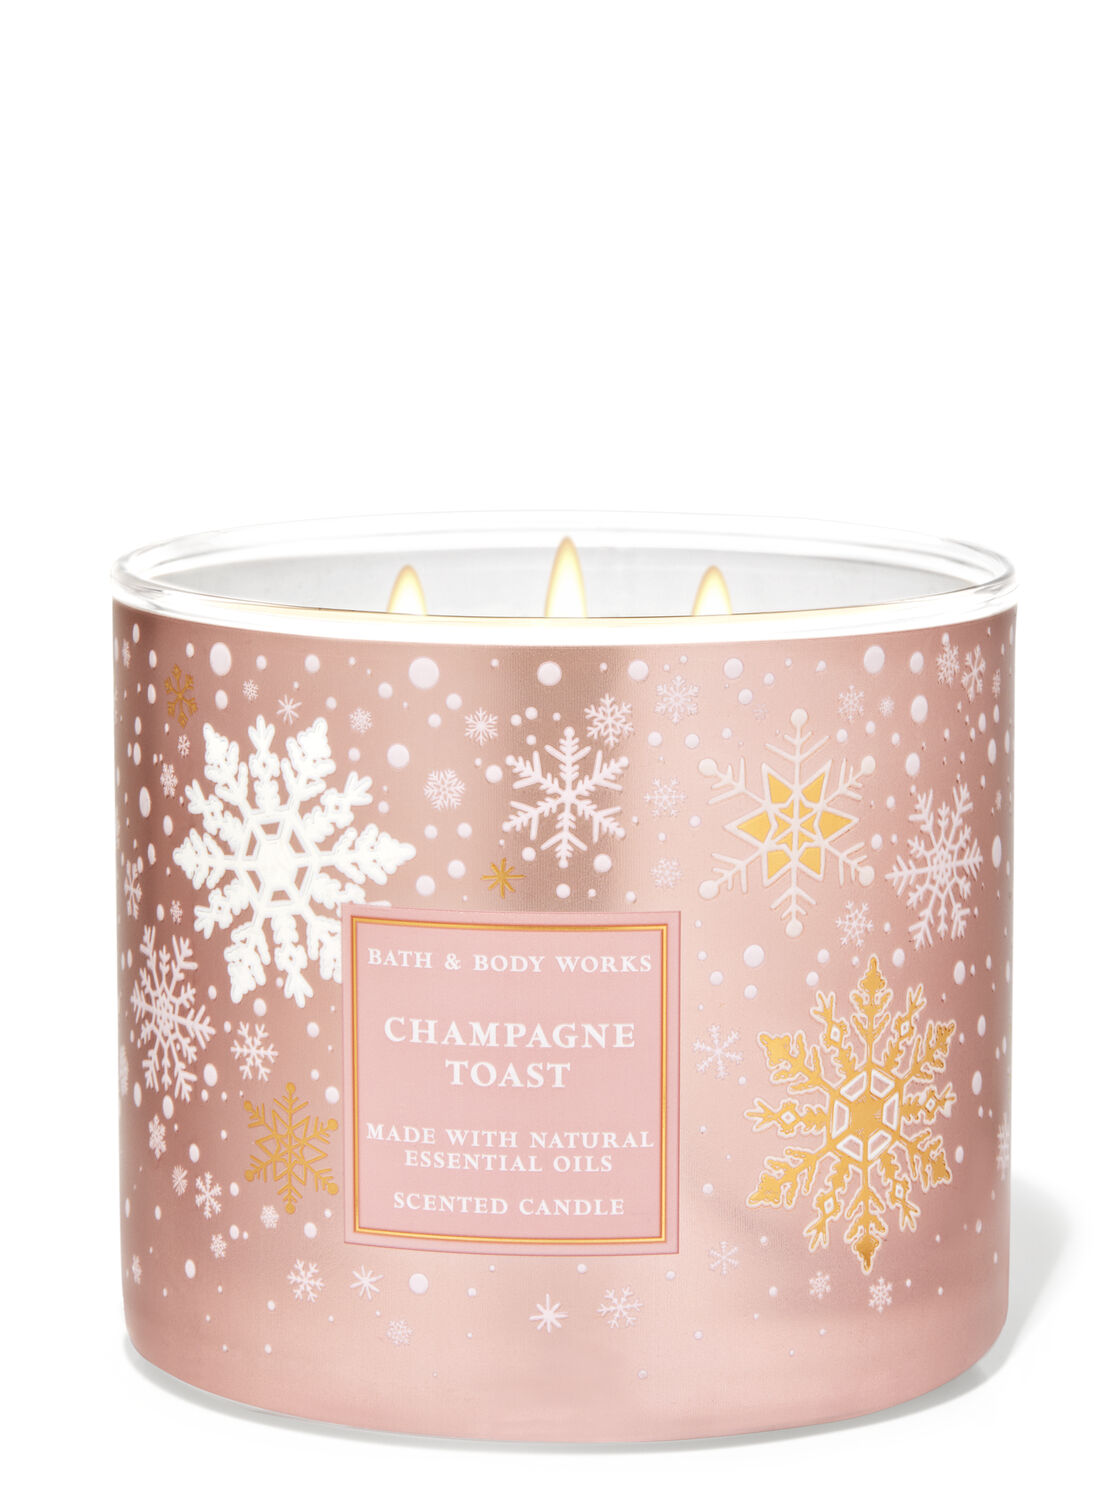 2 Bath & Body Works Champagne Toast 3-Wick Large Candle 14.5 